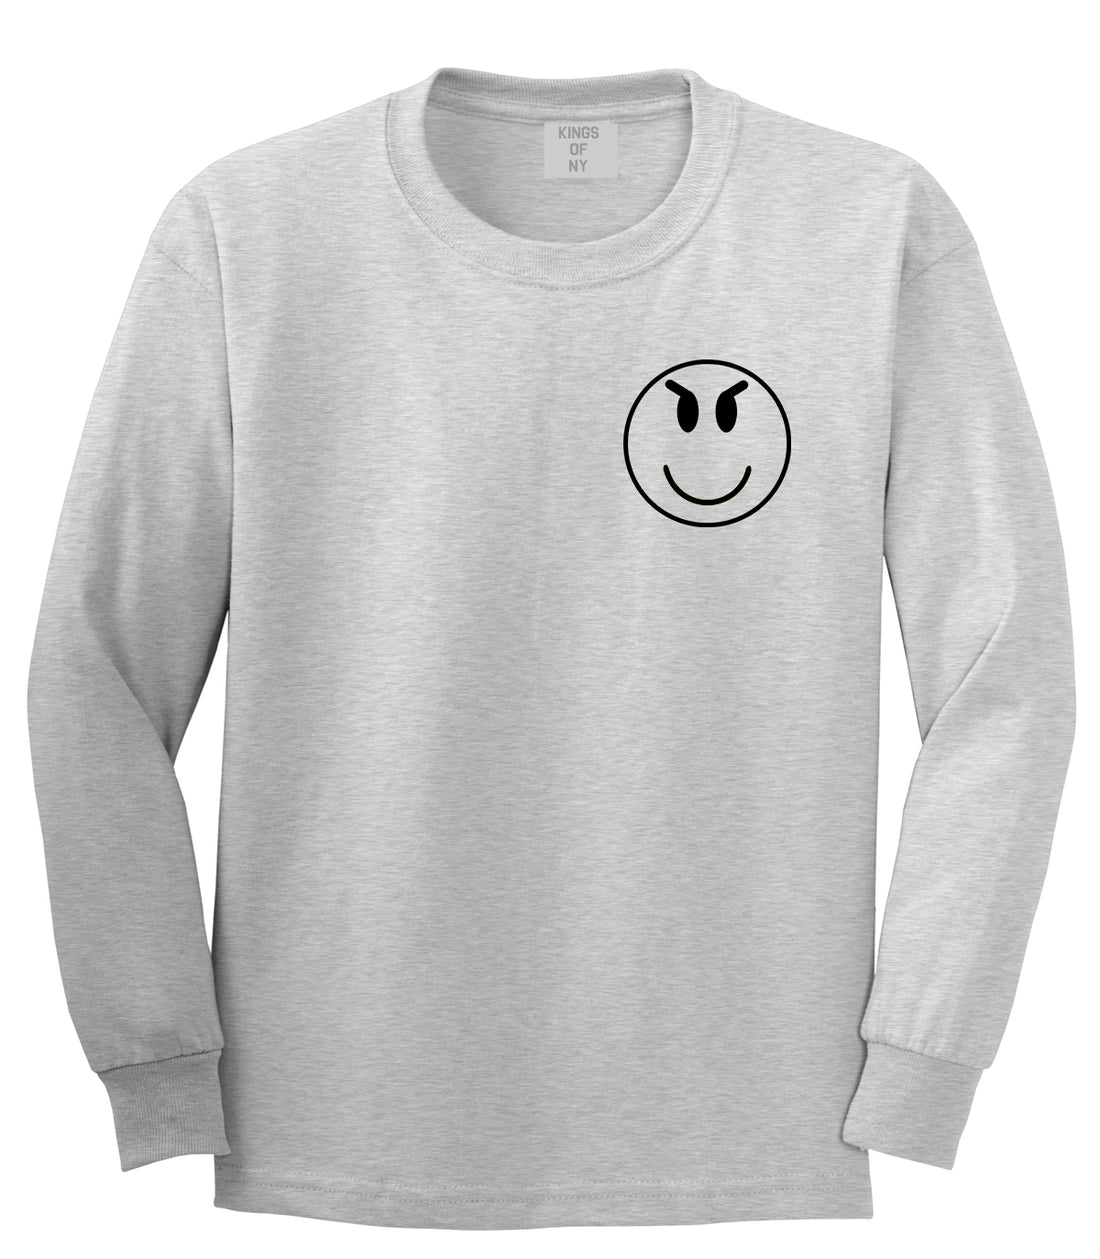 Evil Face Emoji Chest Mens Grey Long Sleeve T-Shirt by KINGS OF NY